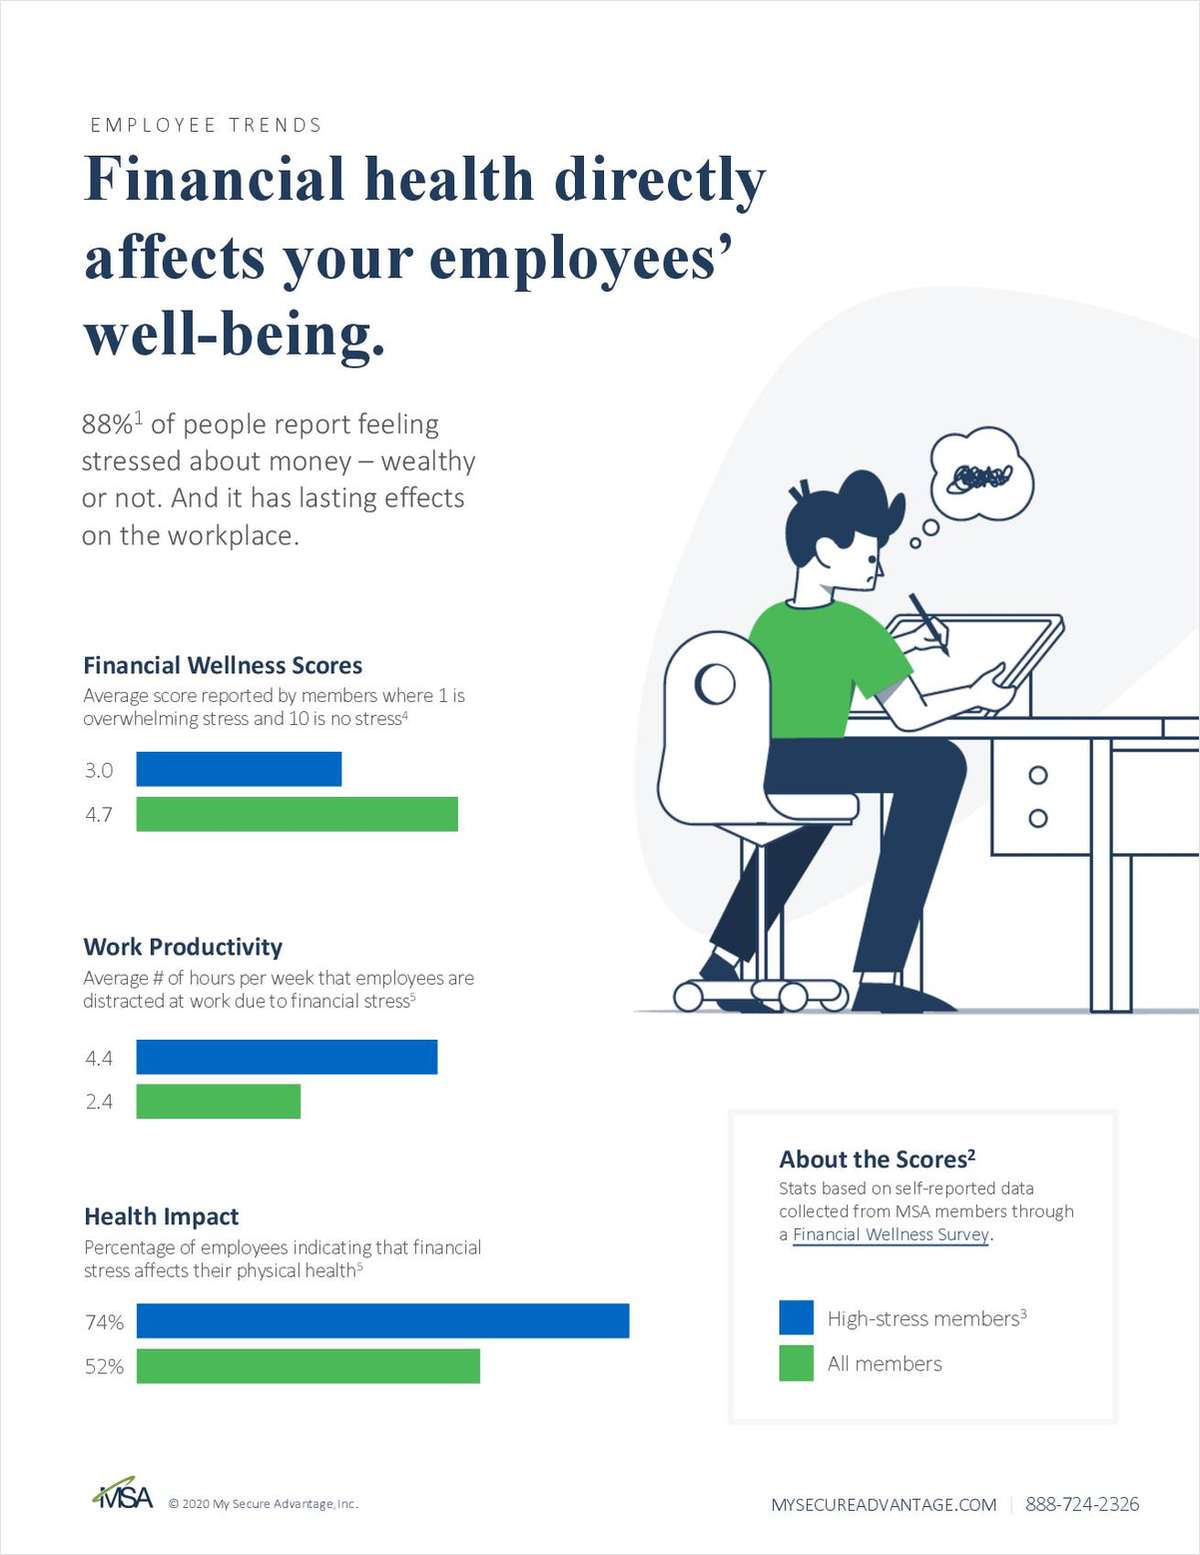 Financial health directly affects your employees' well-being